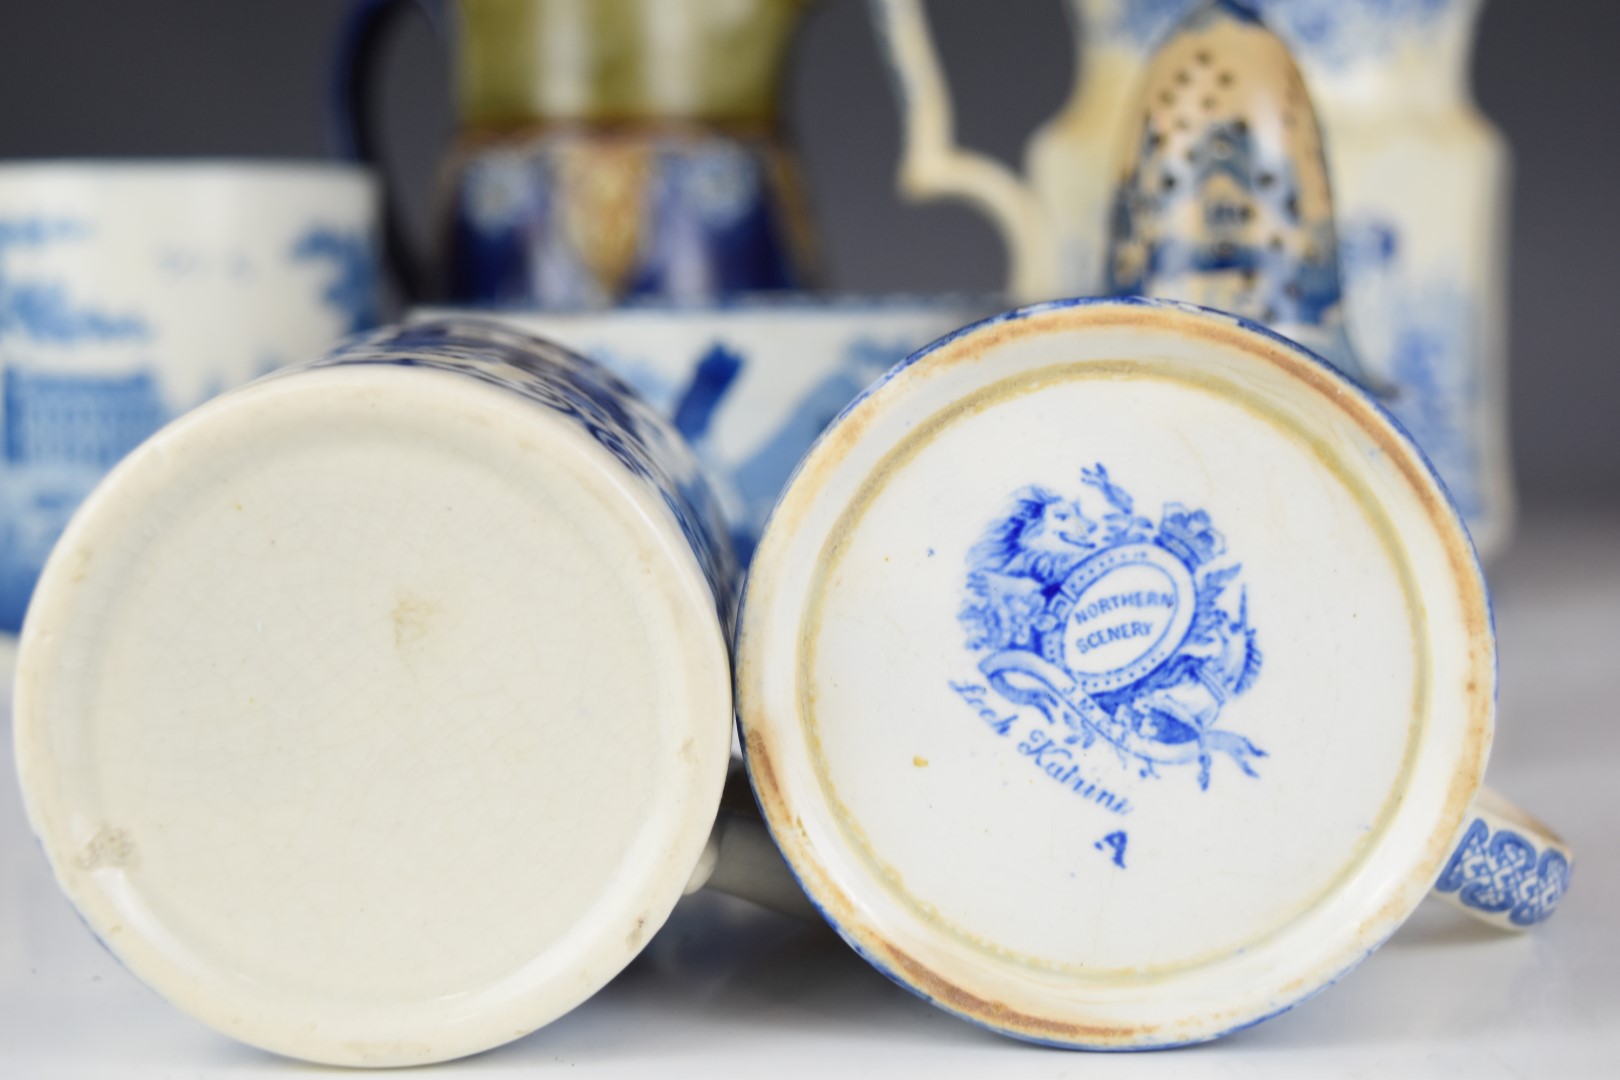 19thC blue and white transfer printed ware including a sifter, large tankard, jug with sporting - Image 3 of 8